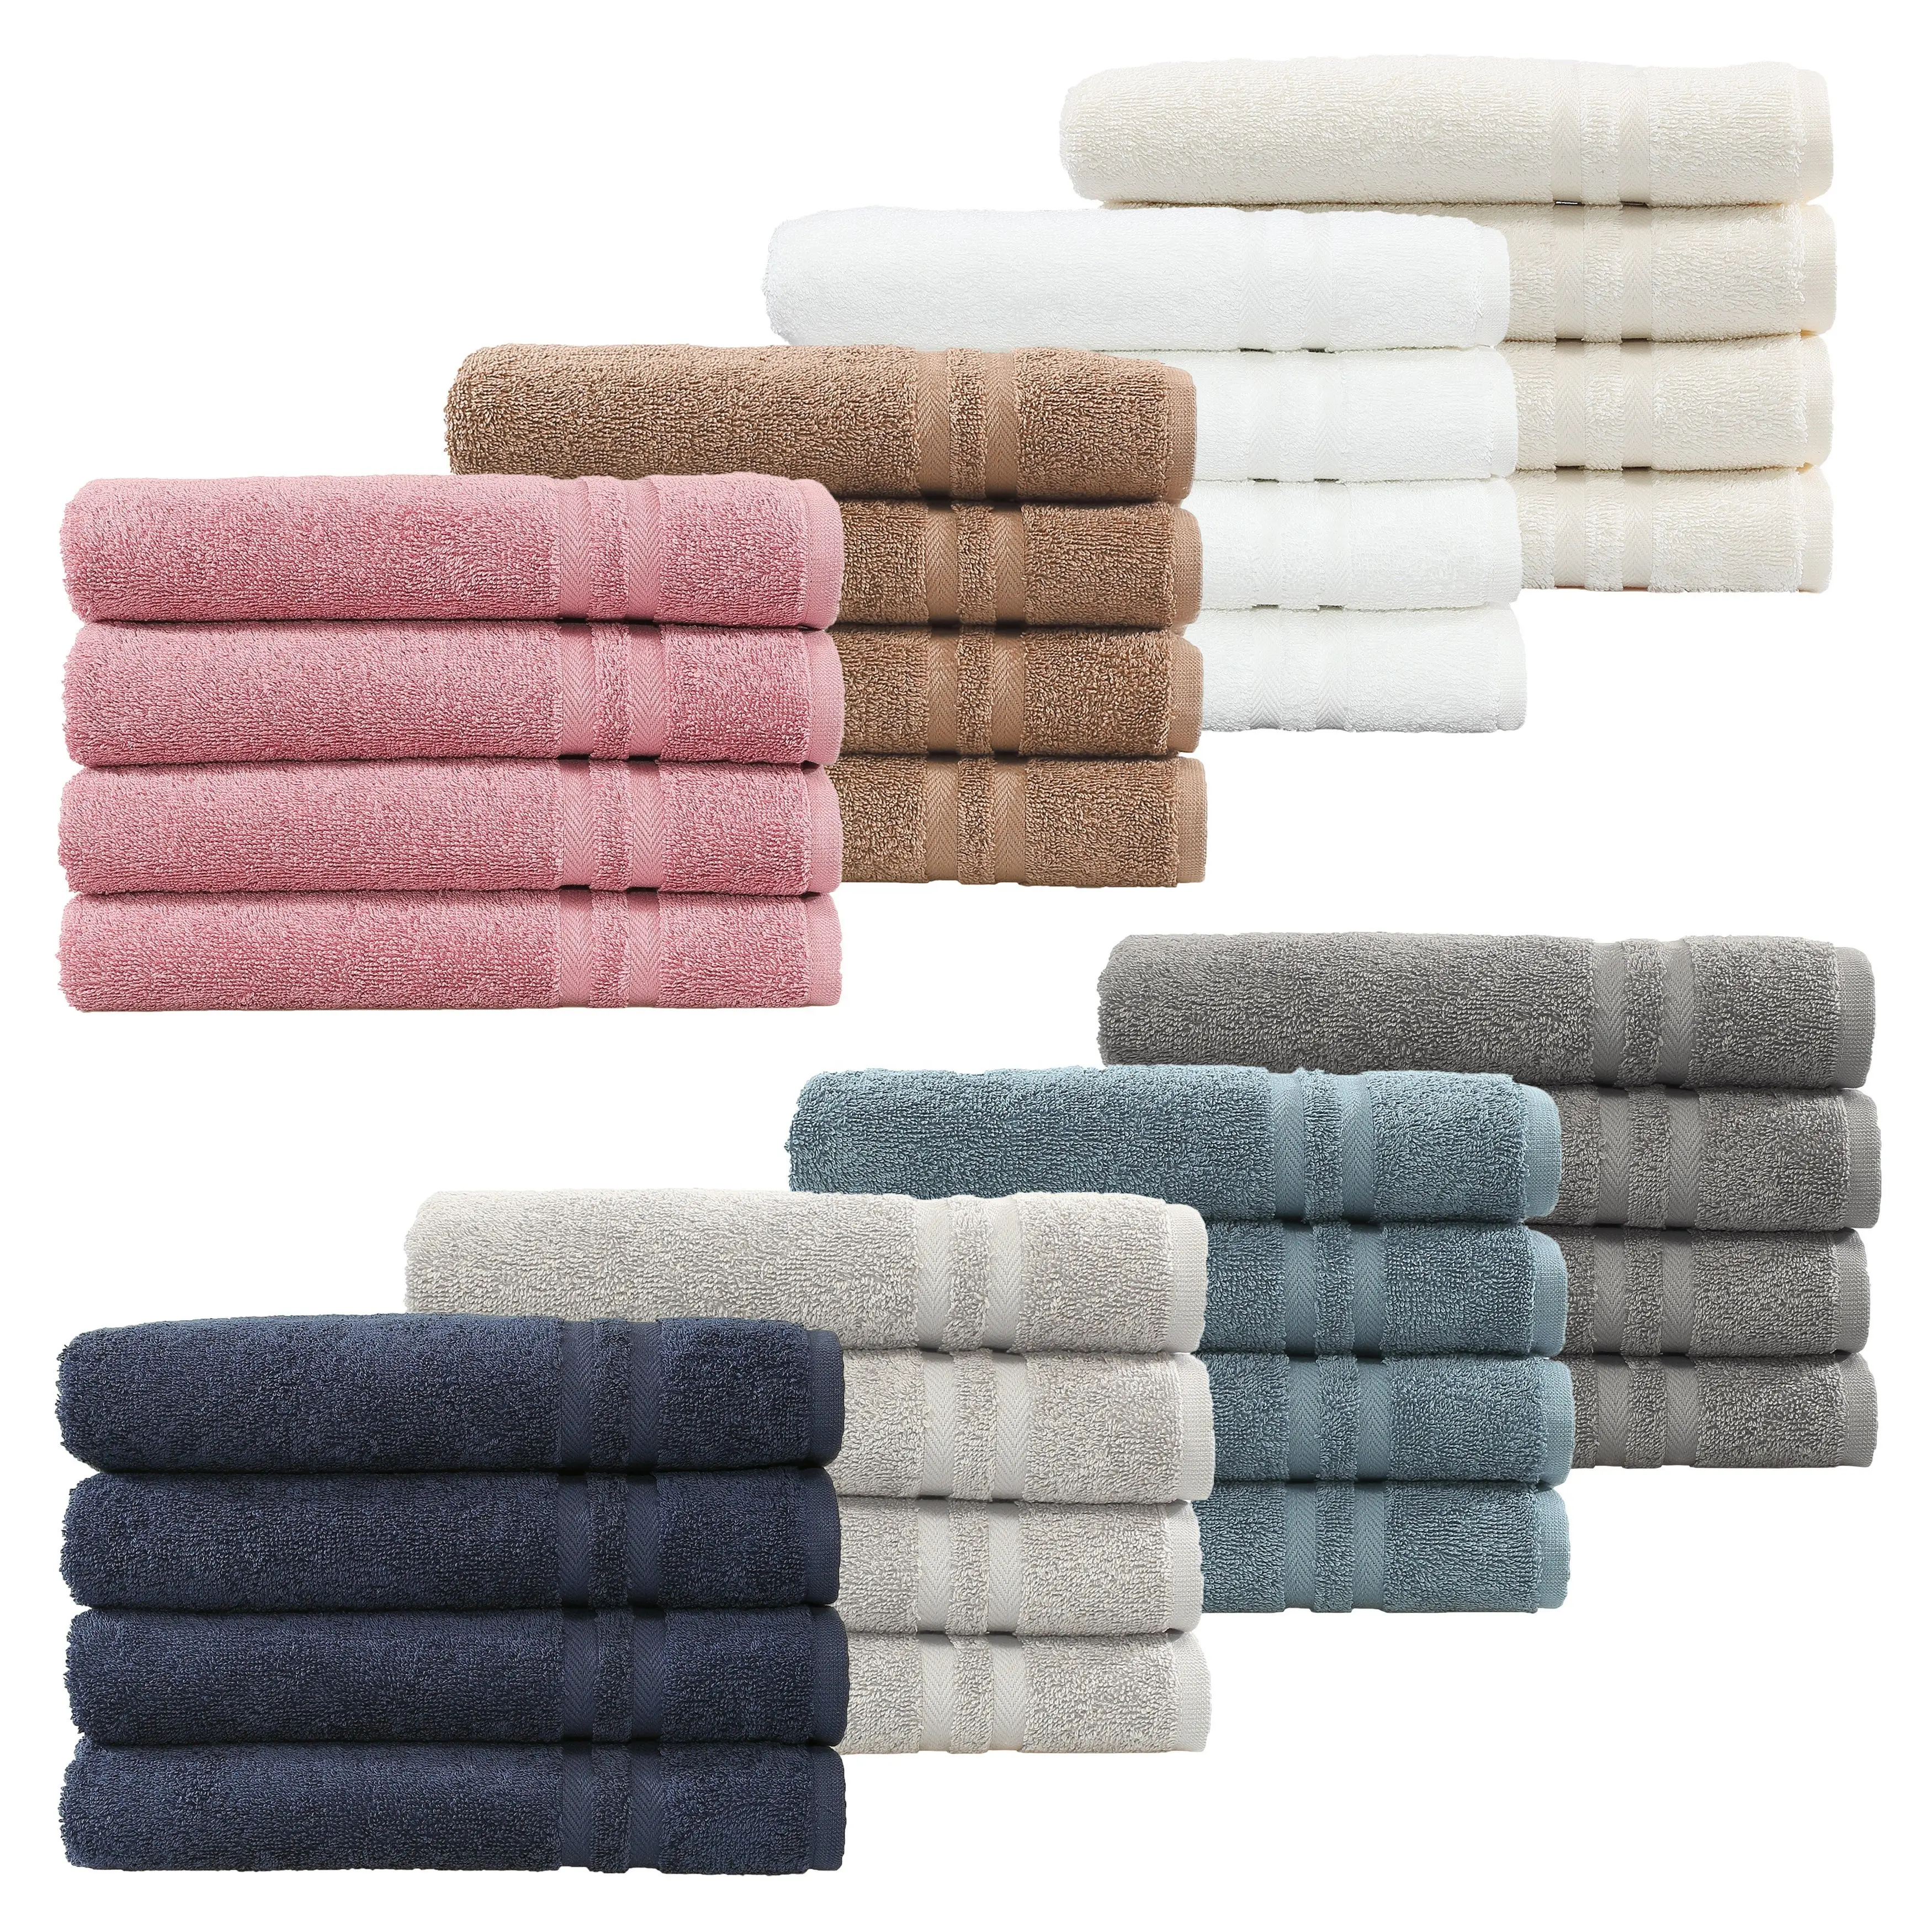 Hotel Terry 100% Cotton Bath Towel Set With Great Quality